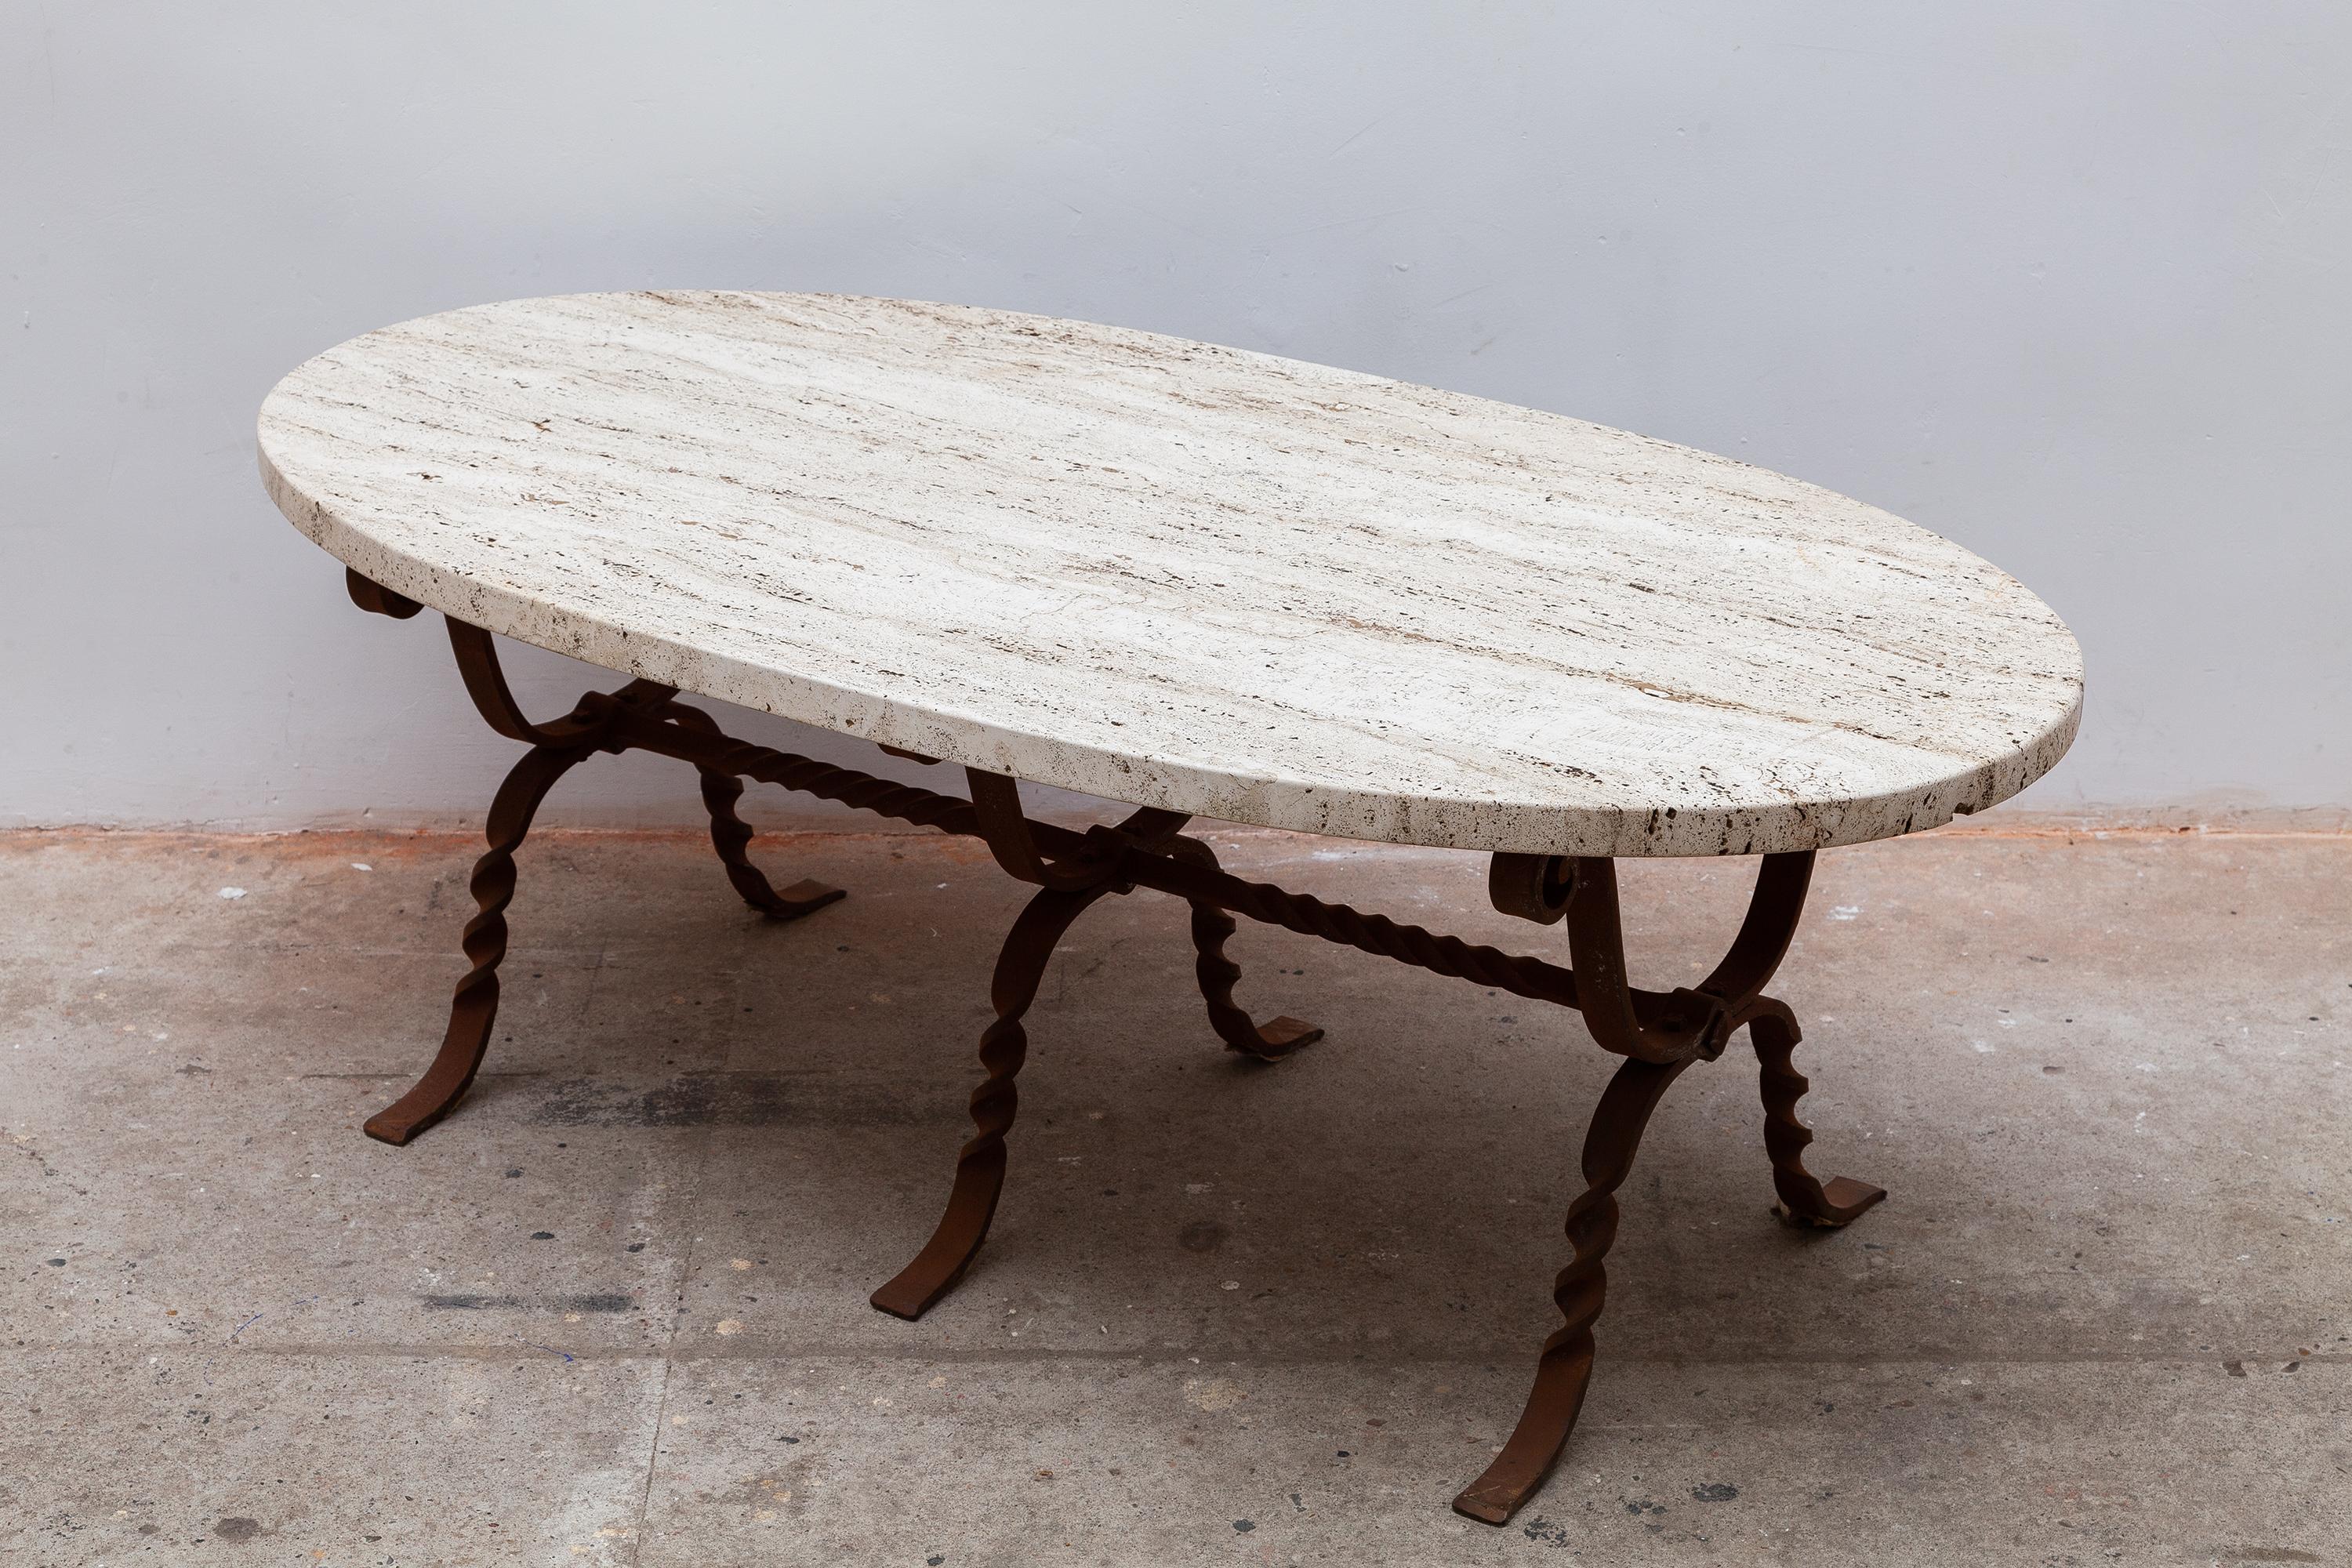 Brutalist decorative wrought iron base with a beautiful travertine top in the natural tone of white and brown. The turned metal is a warm brown tone. Original condition. Measures: Width of 130 cm.